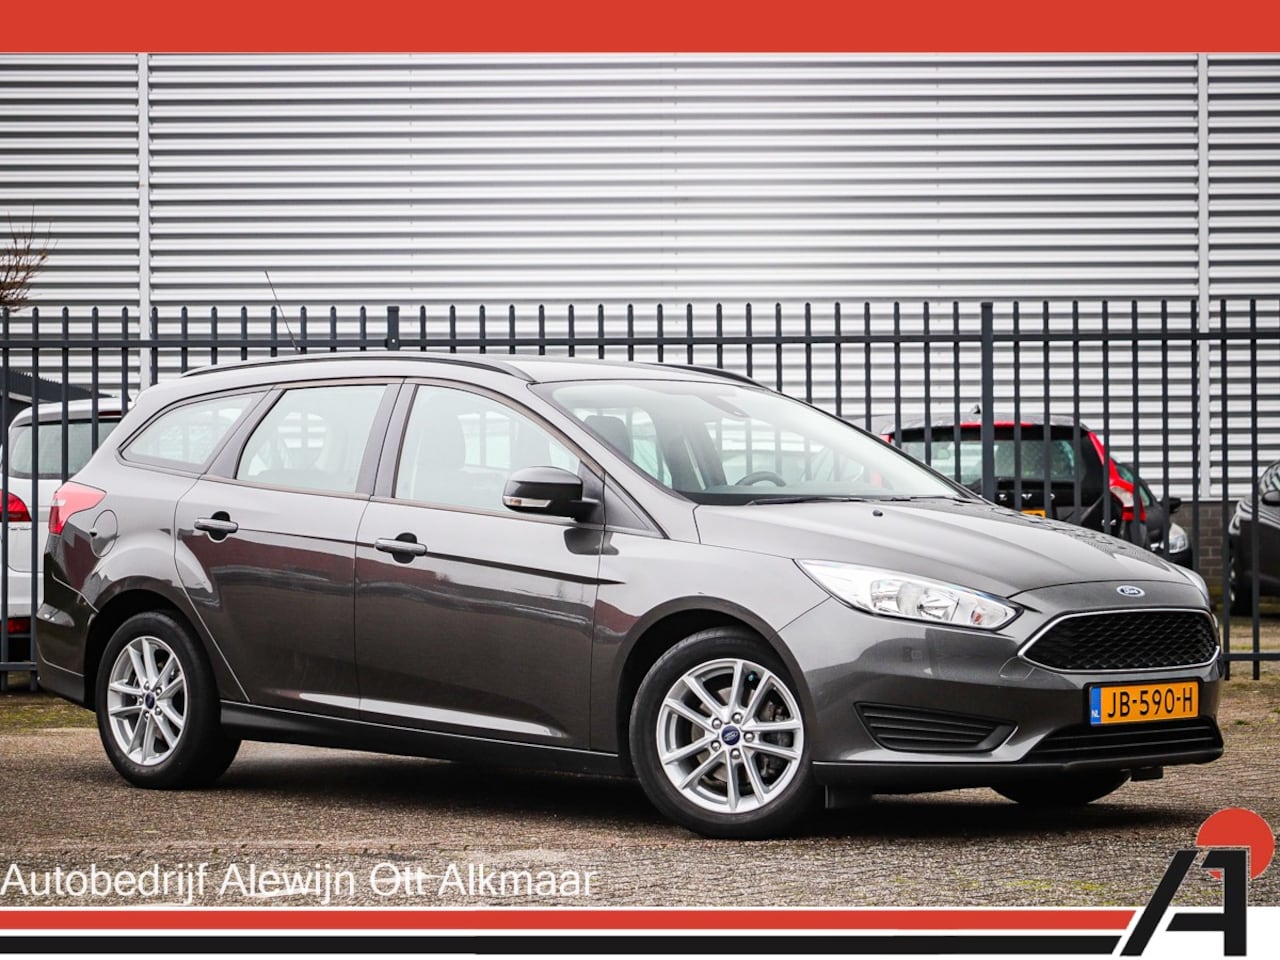 Ford Focus Wagon - 1.0 Trend 1.0 Trend - AutoWereld.nl